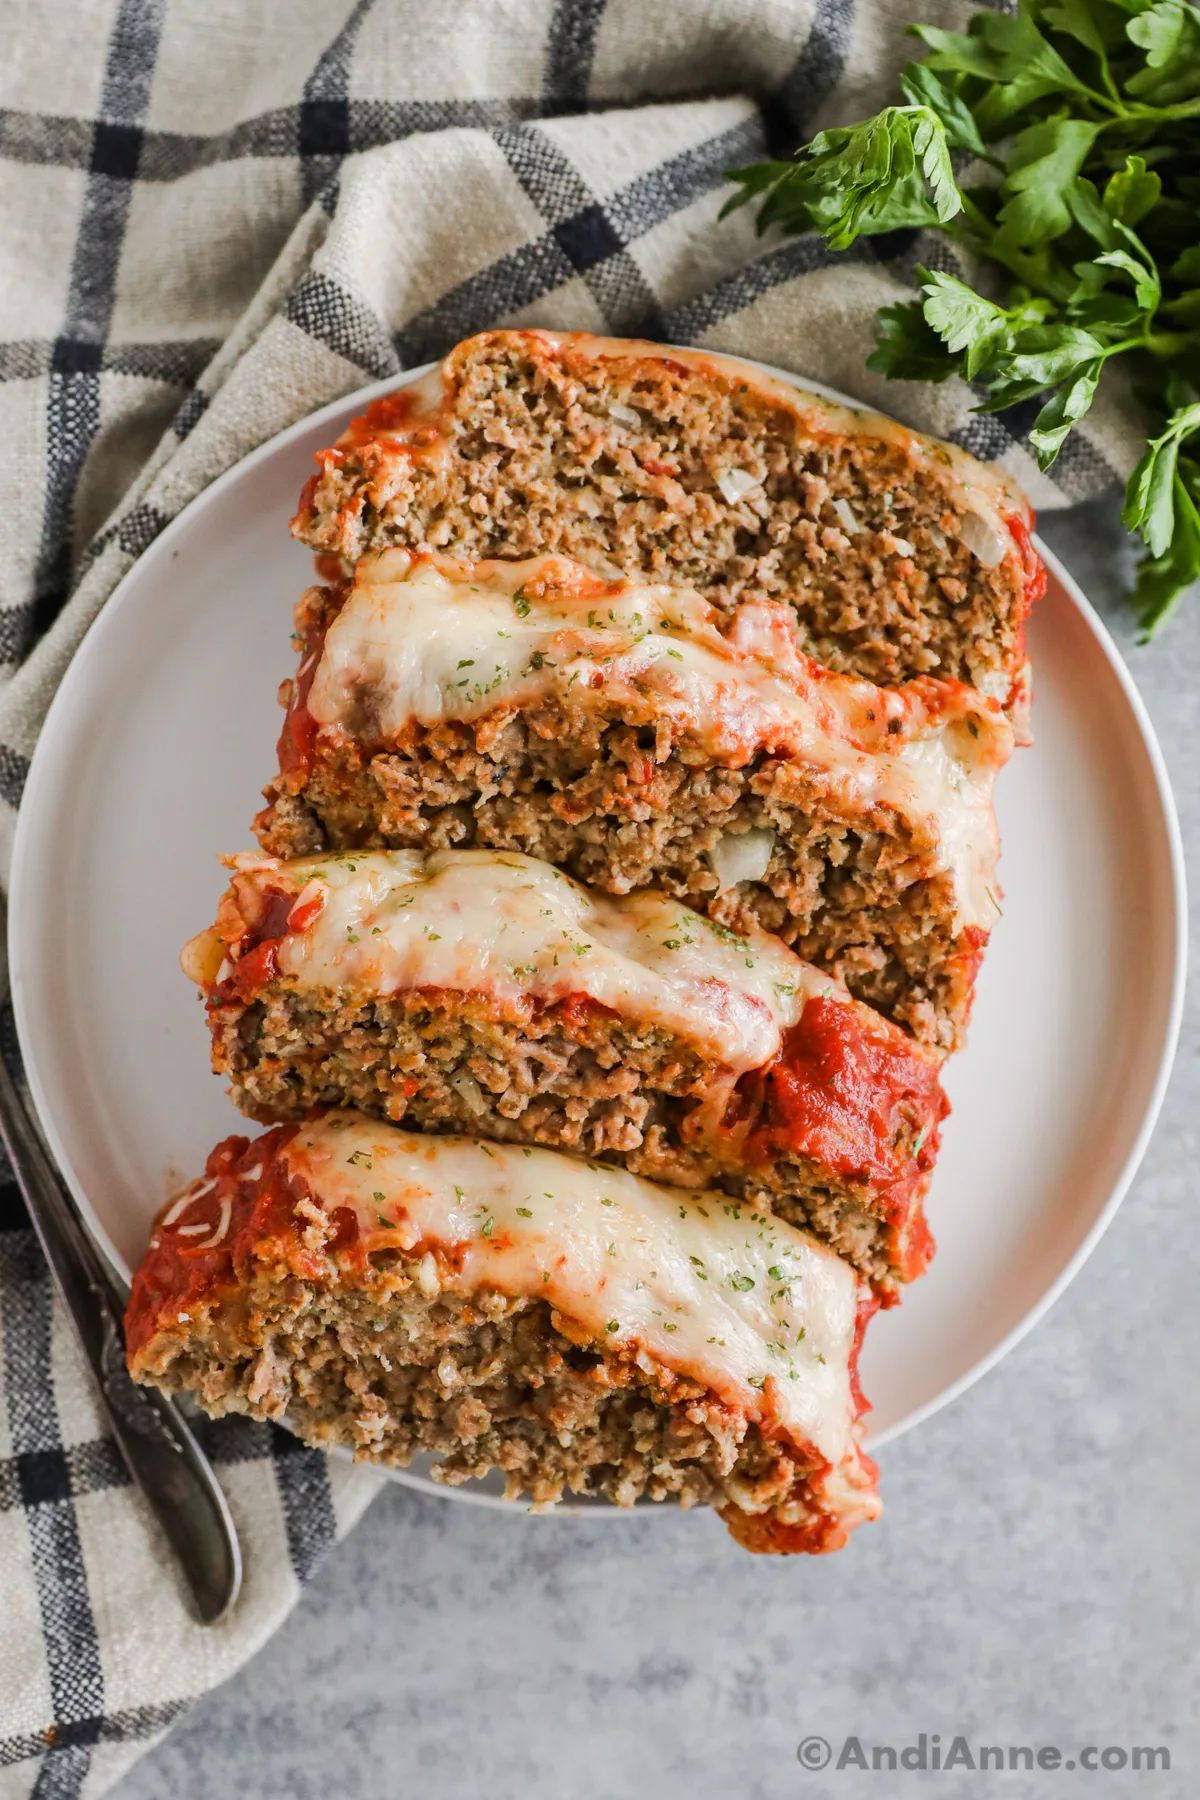 Slices of italian meatloaf on a plate.